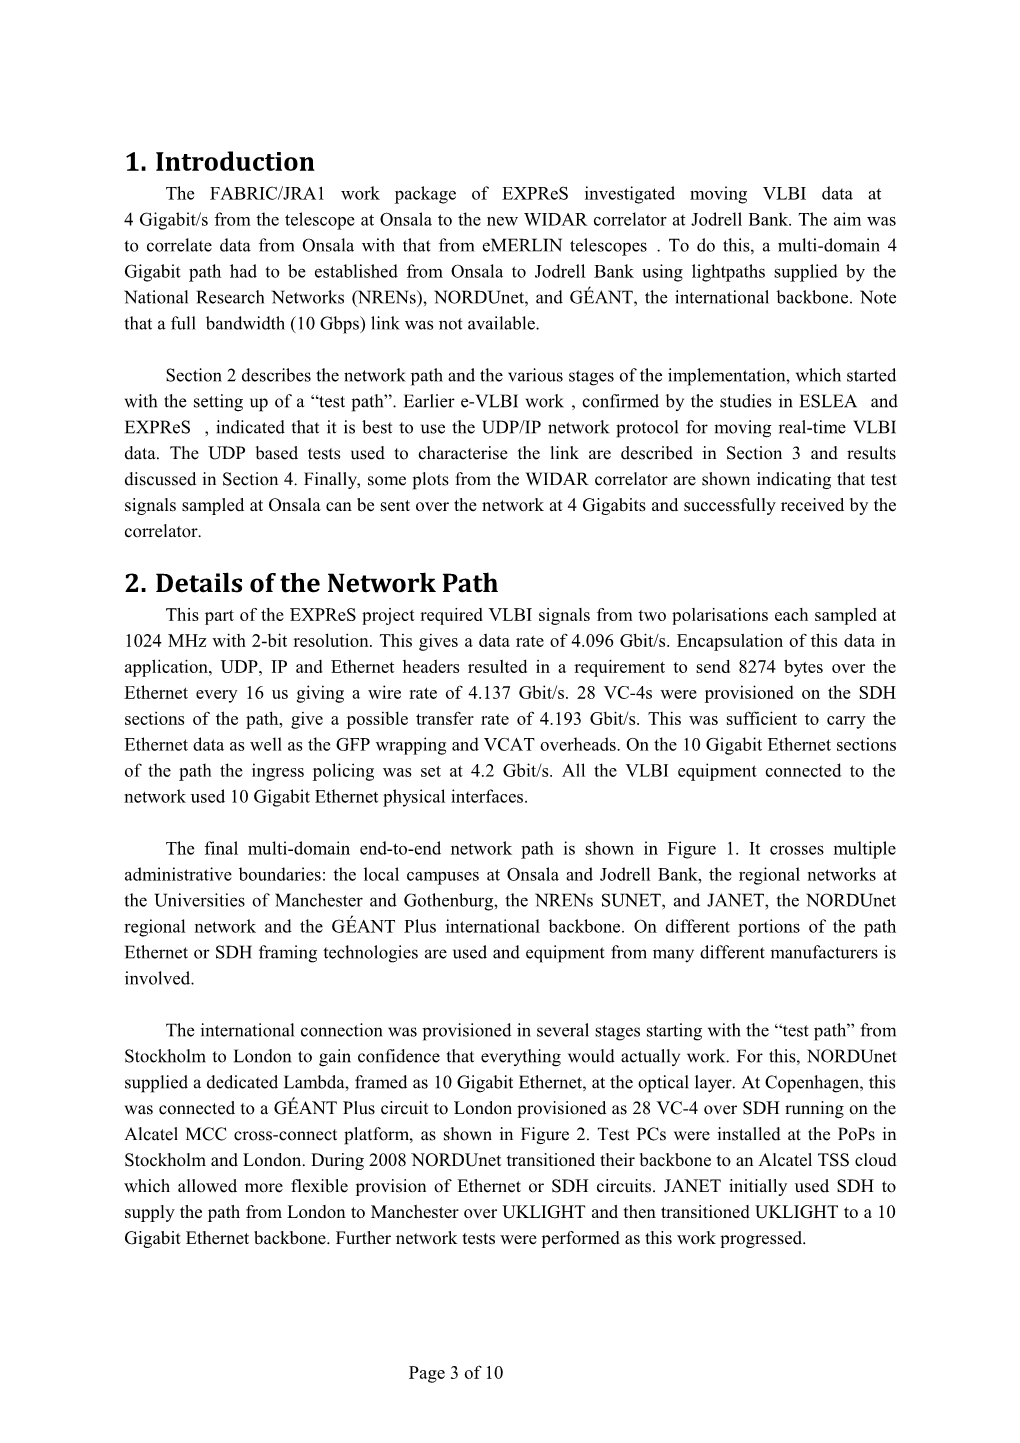 2. Details of the Network Path